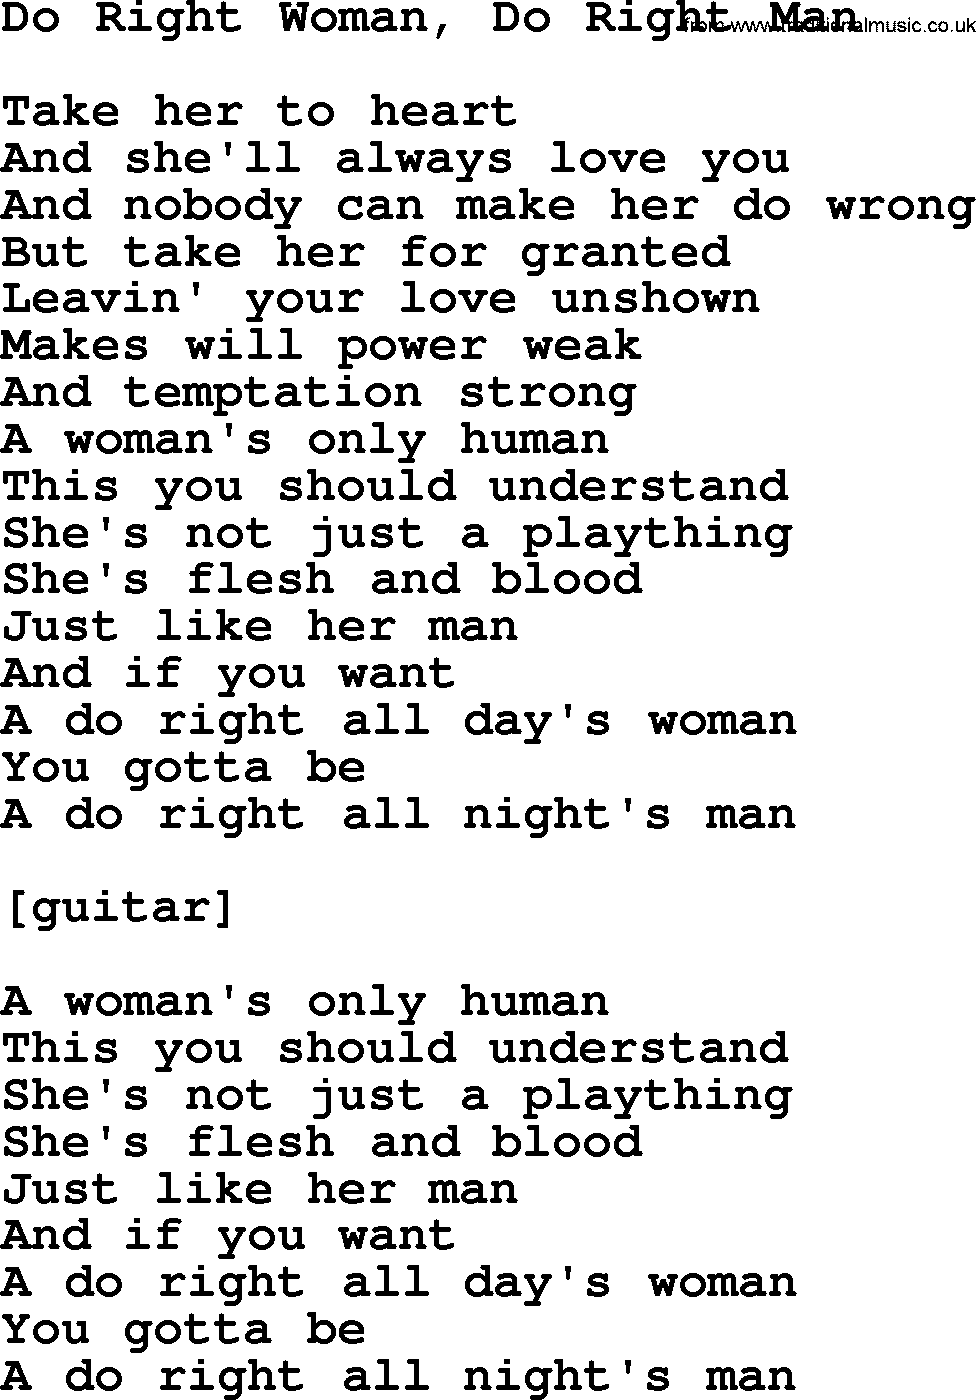 Willie Nelson song: Do Right Woman, Do Right Man lyrics